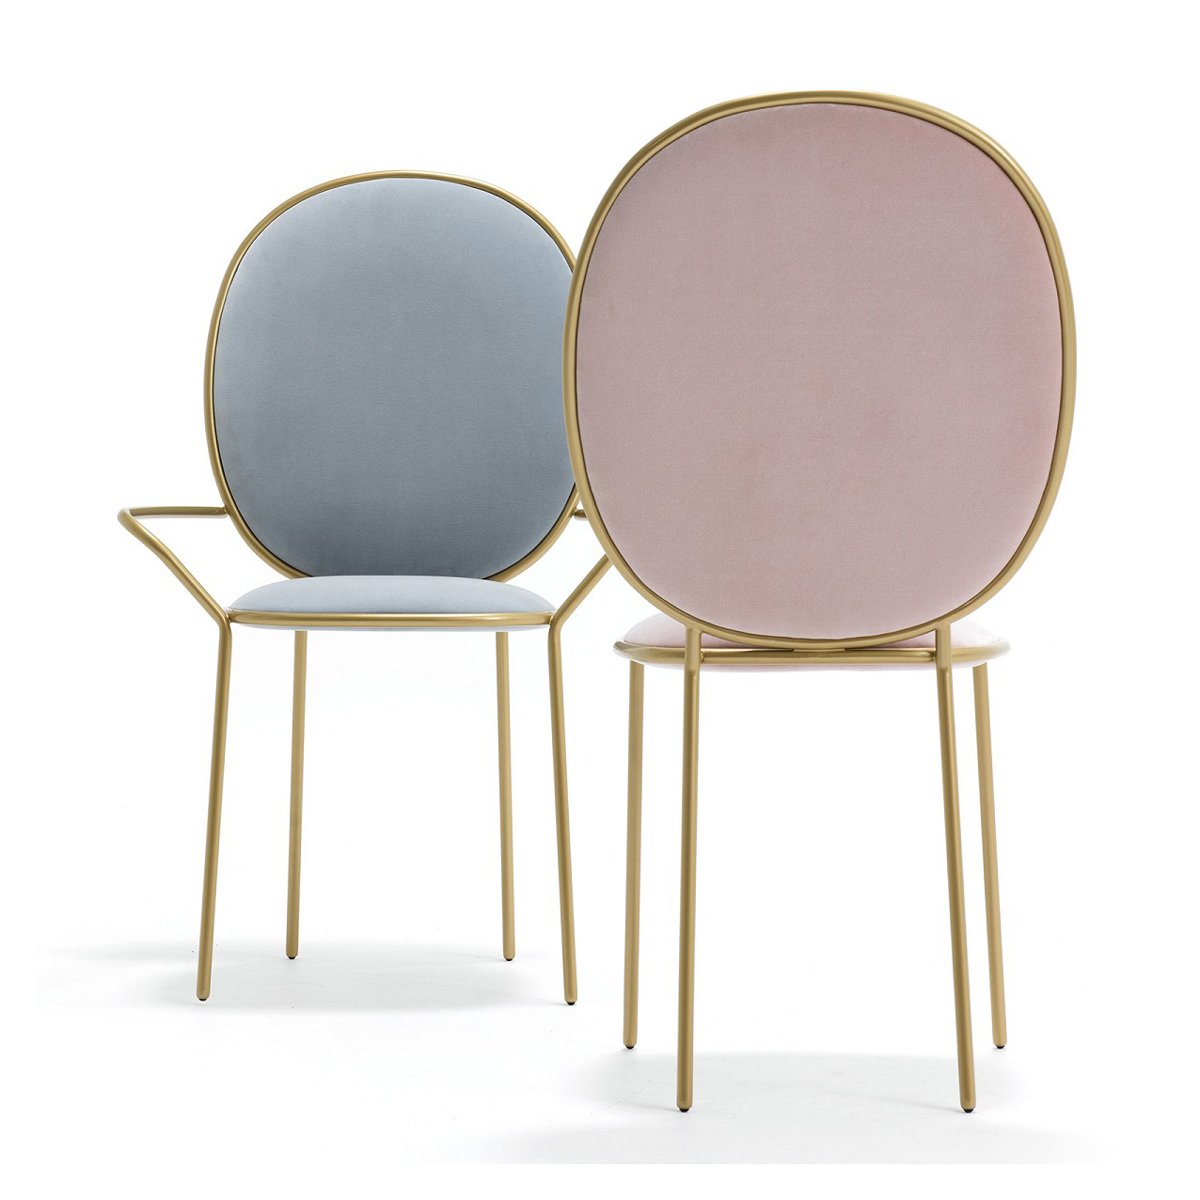 Replica Stay dining chair and armchair - blue and blush